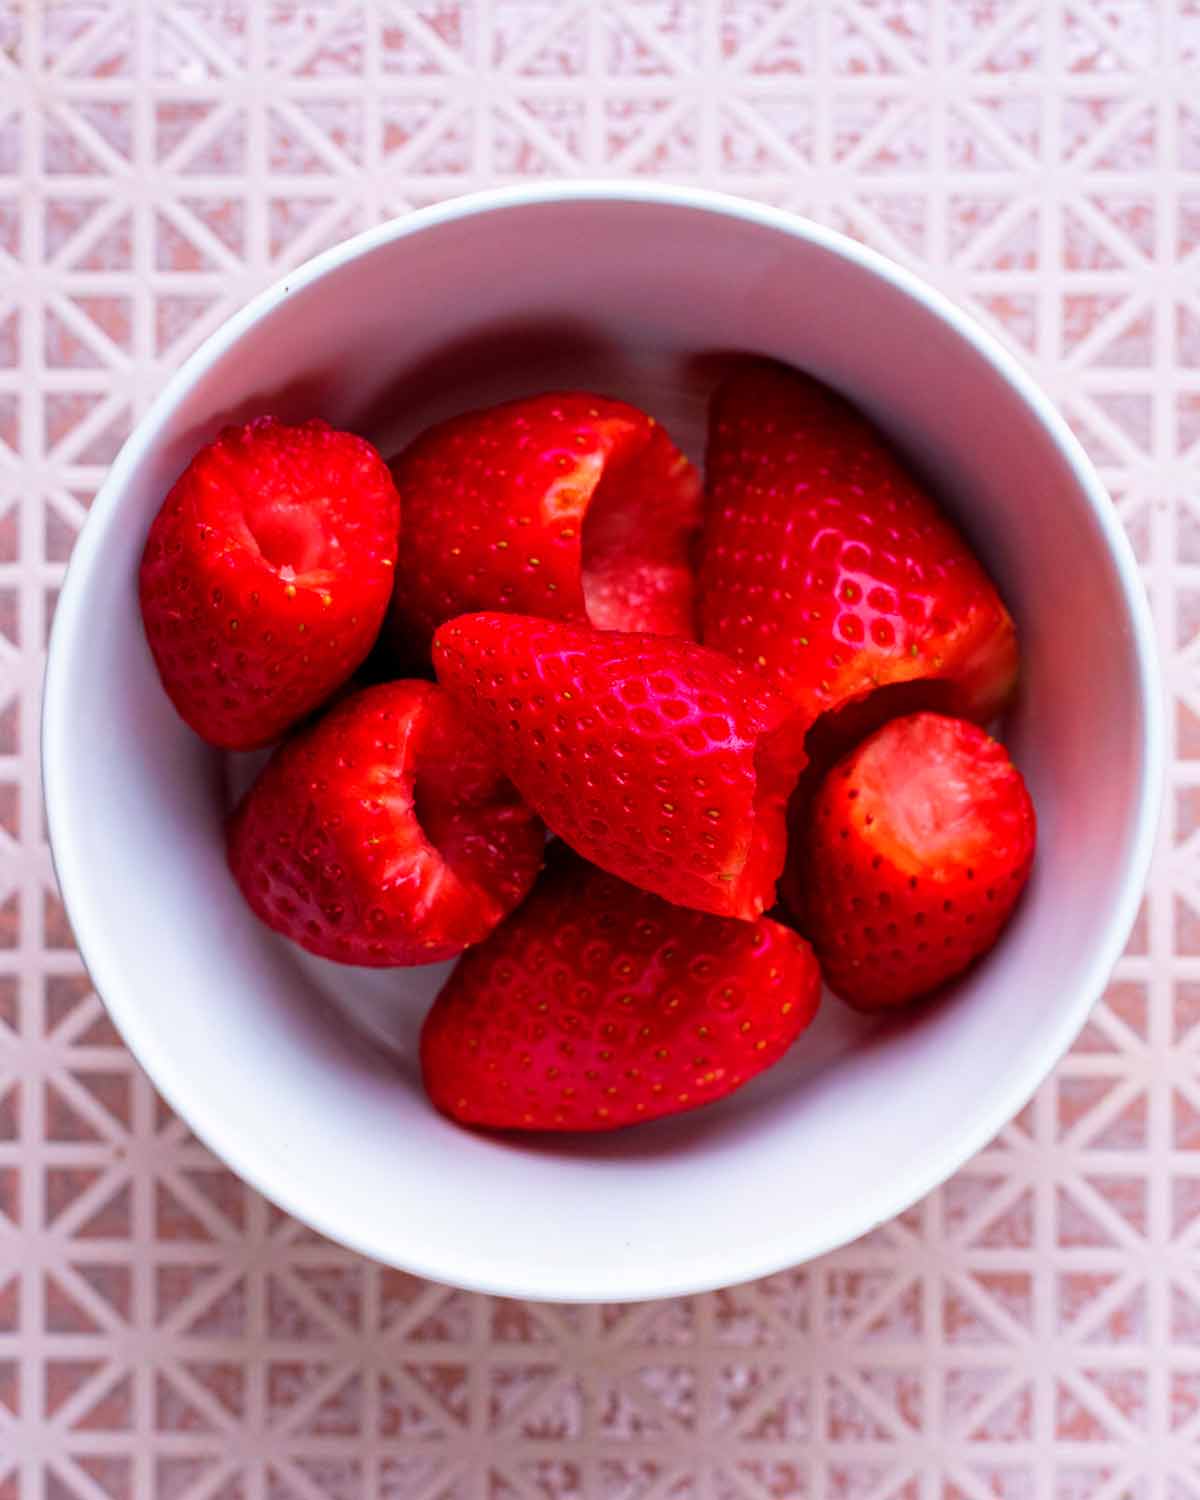 A small bowl of hulled strawberries.